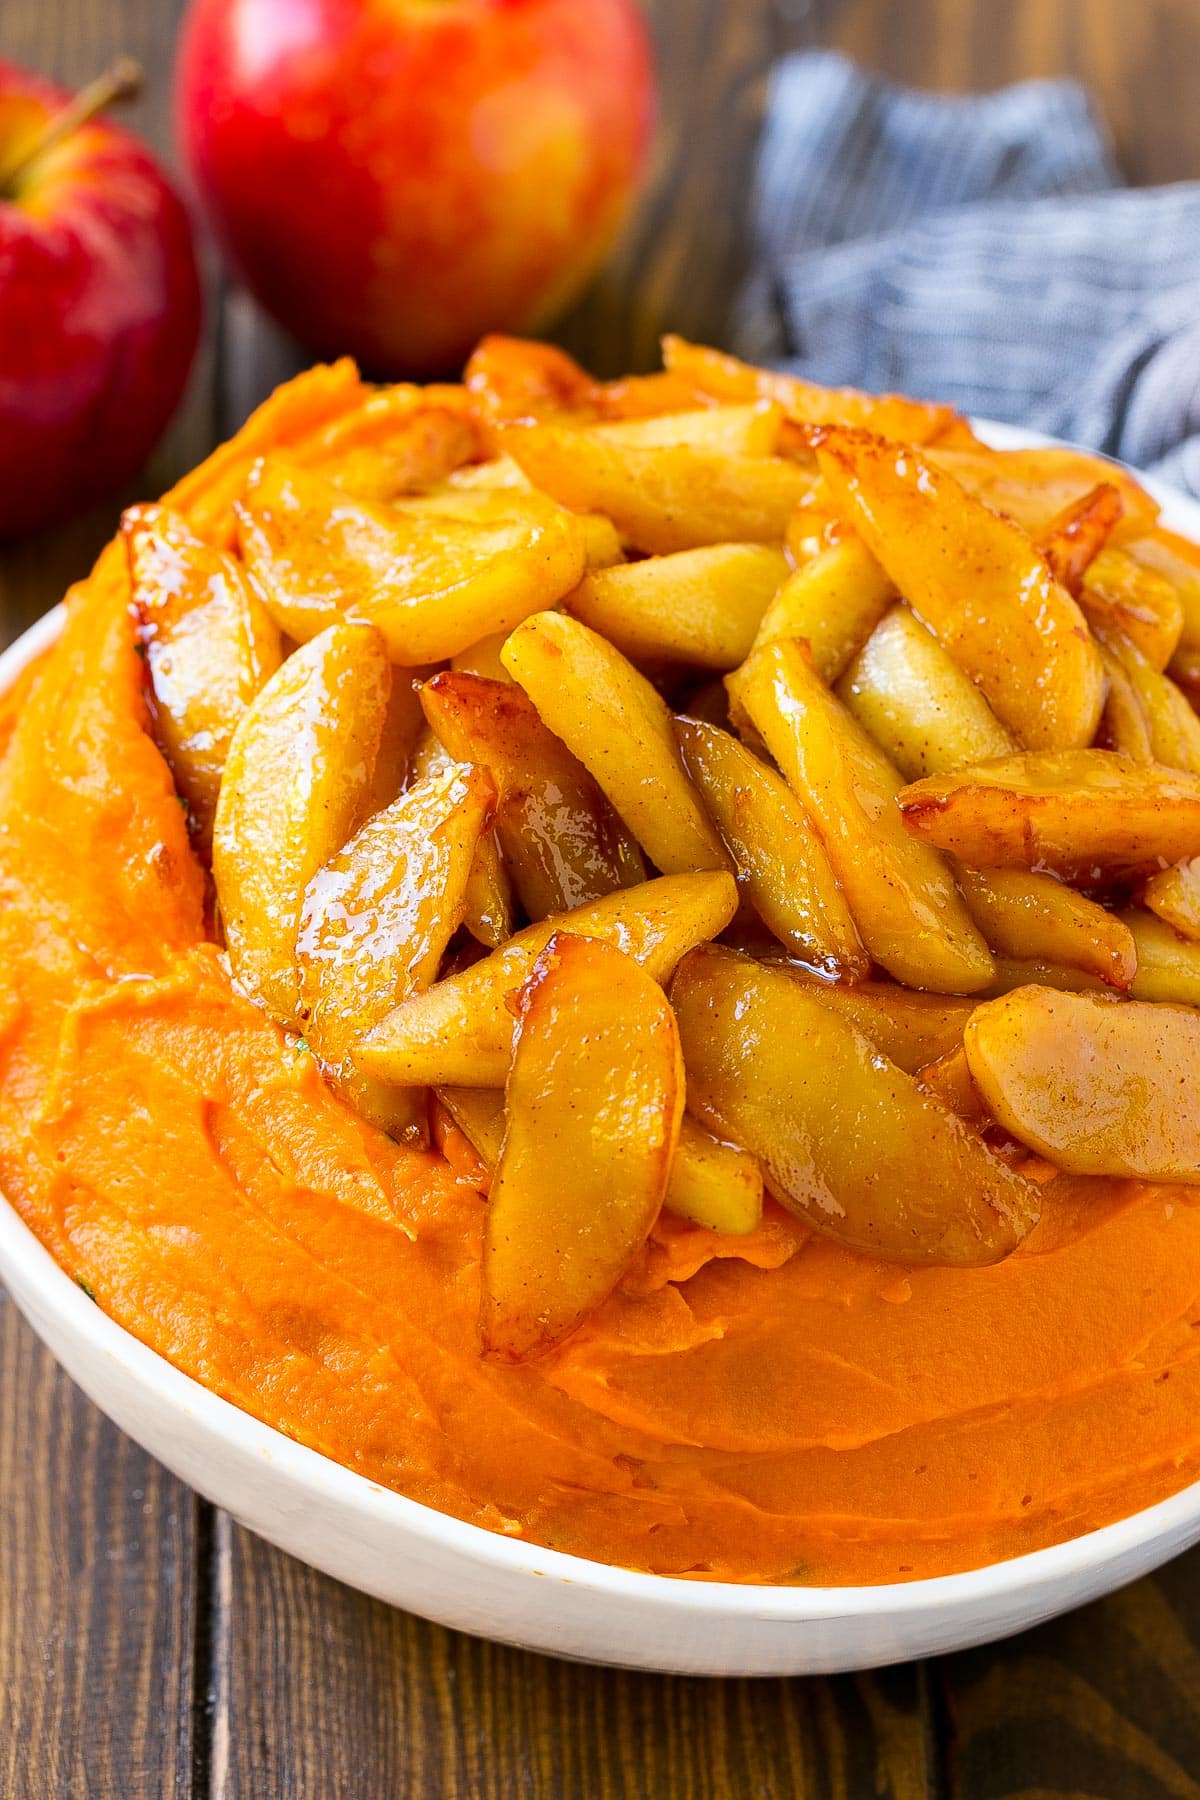 Mashed yams topped with cooked apples.